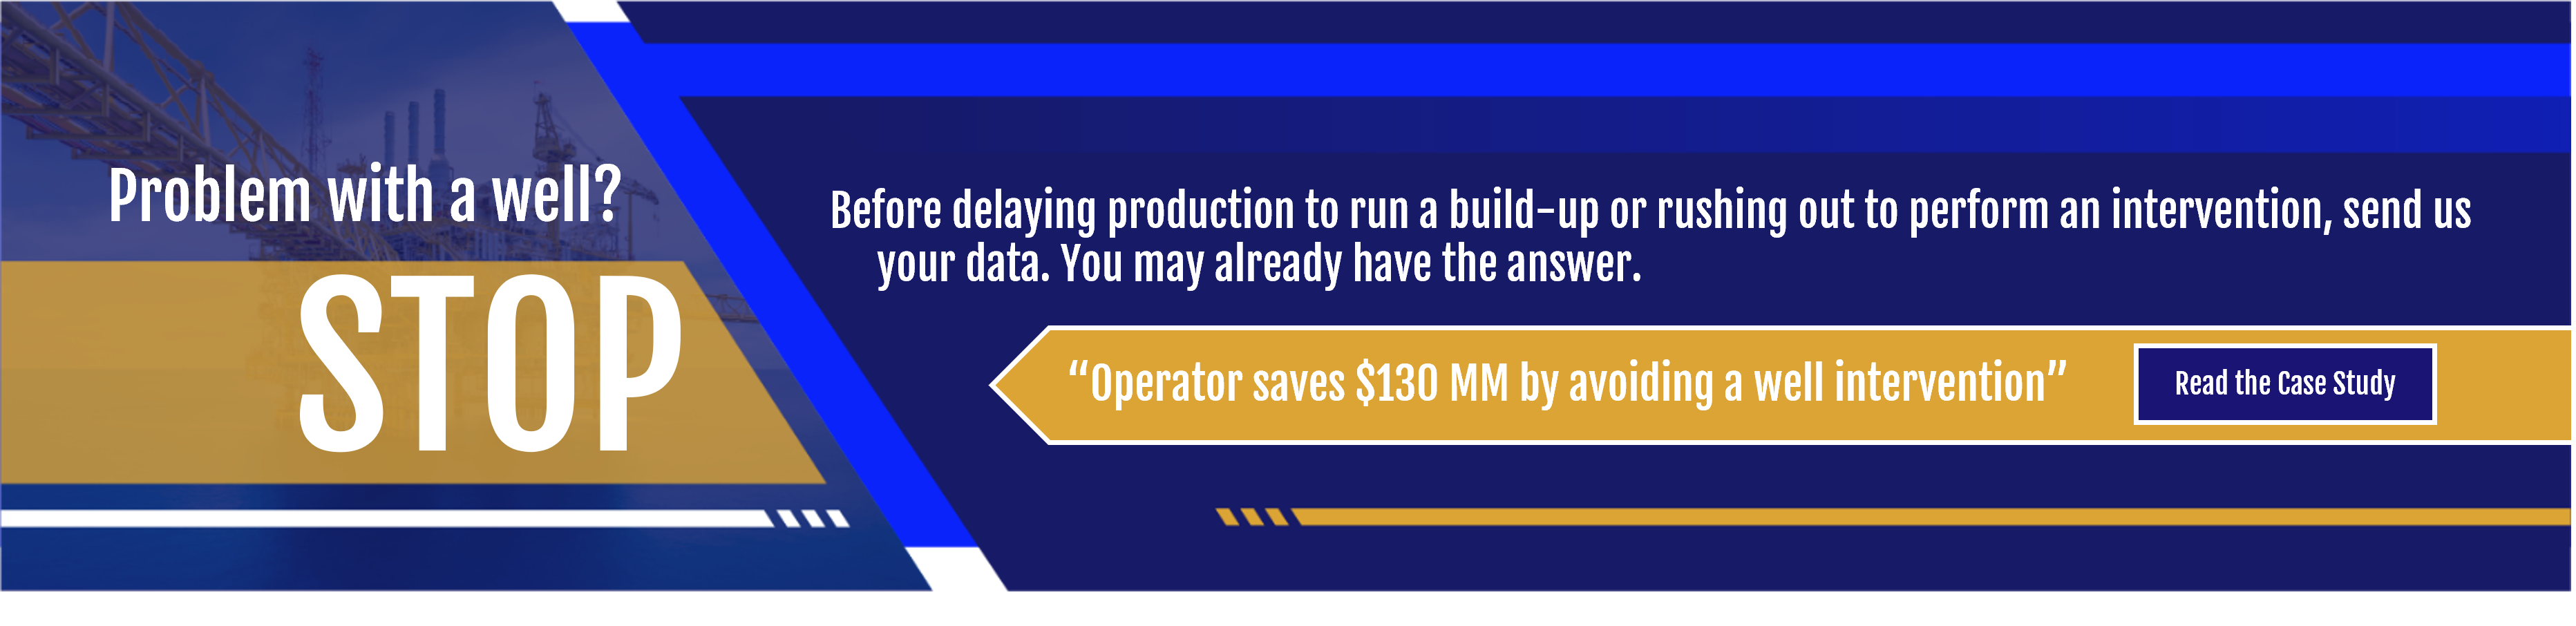 Problem with a well? STOP. Before delaying production to run a build-up or rushing out to perform an intervention, send us your data. you may already have the answer.